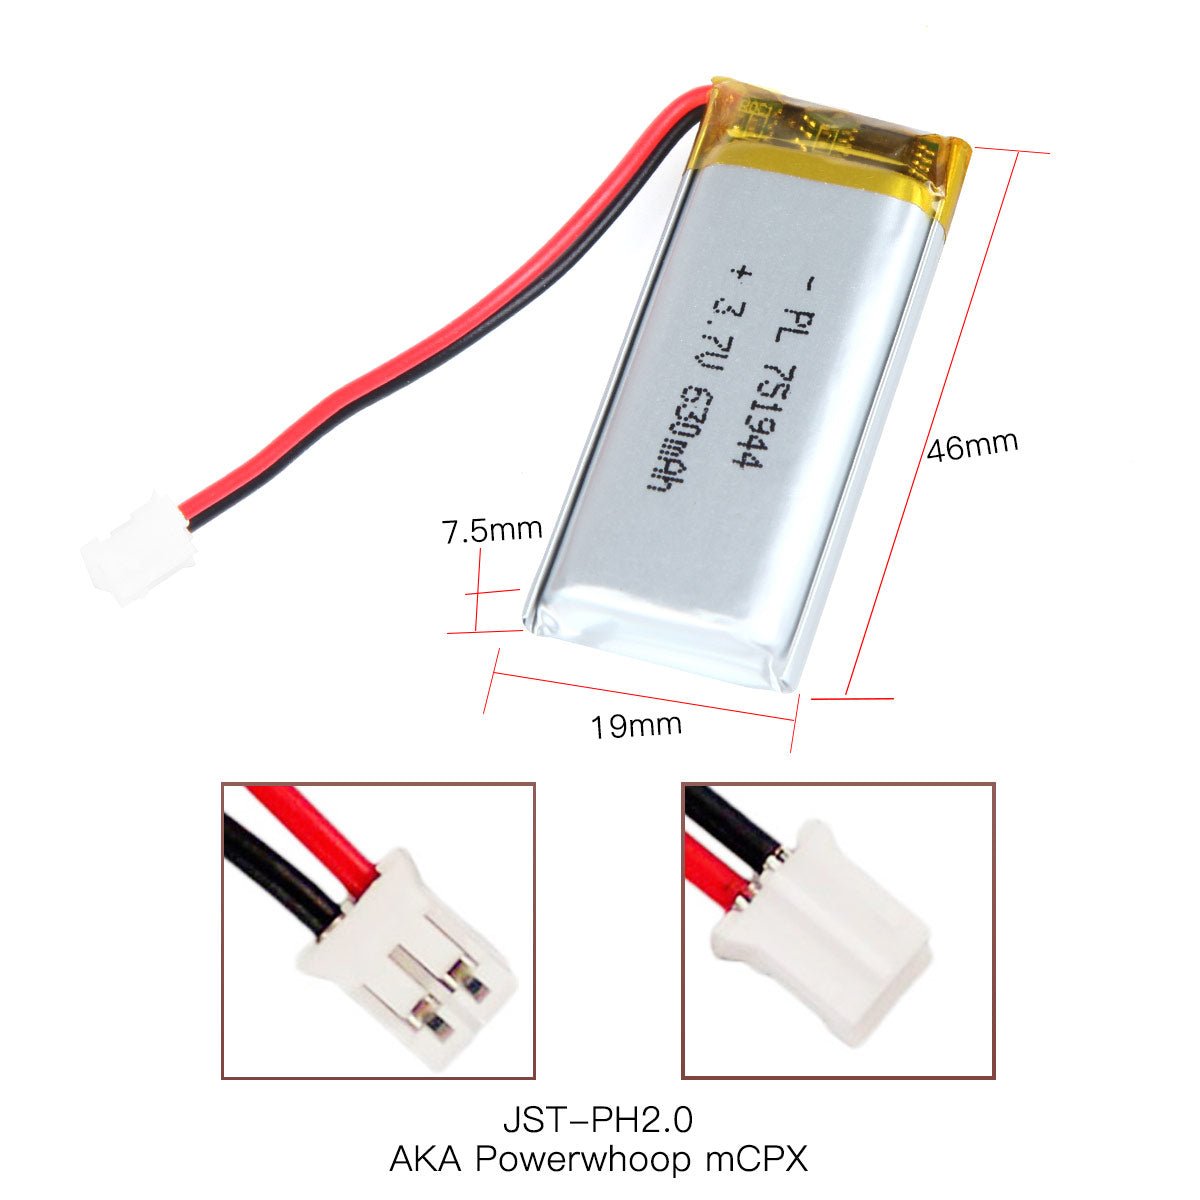 YDL 3.7V 630mAh 751944 Rechargeable Lithium Polymer Battery